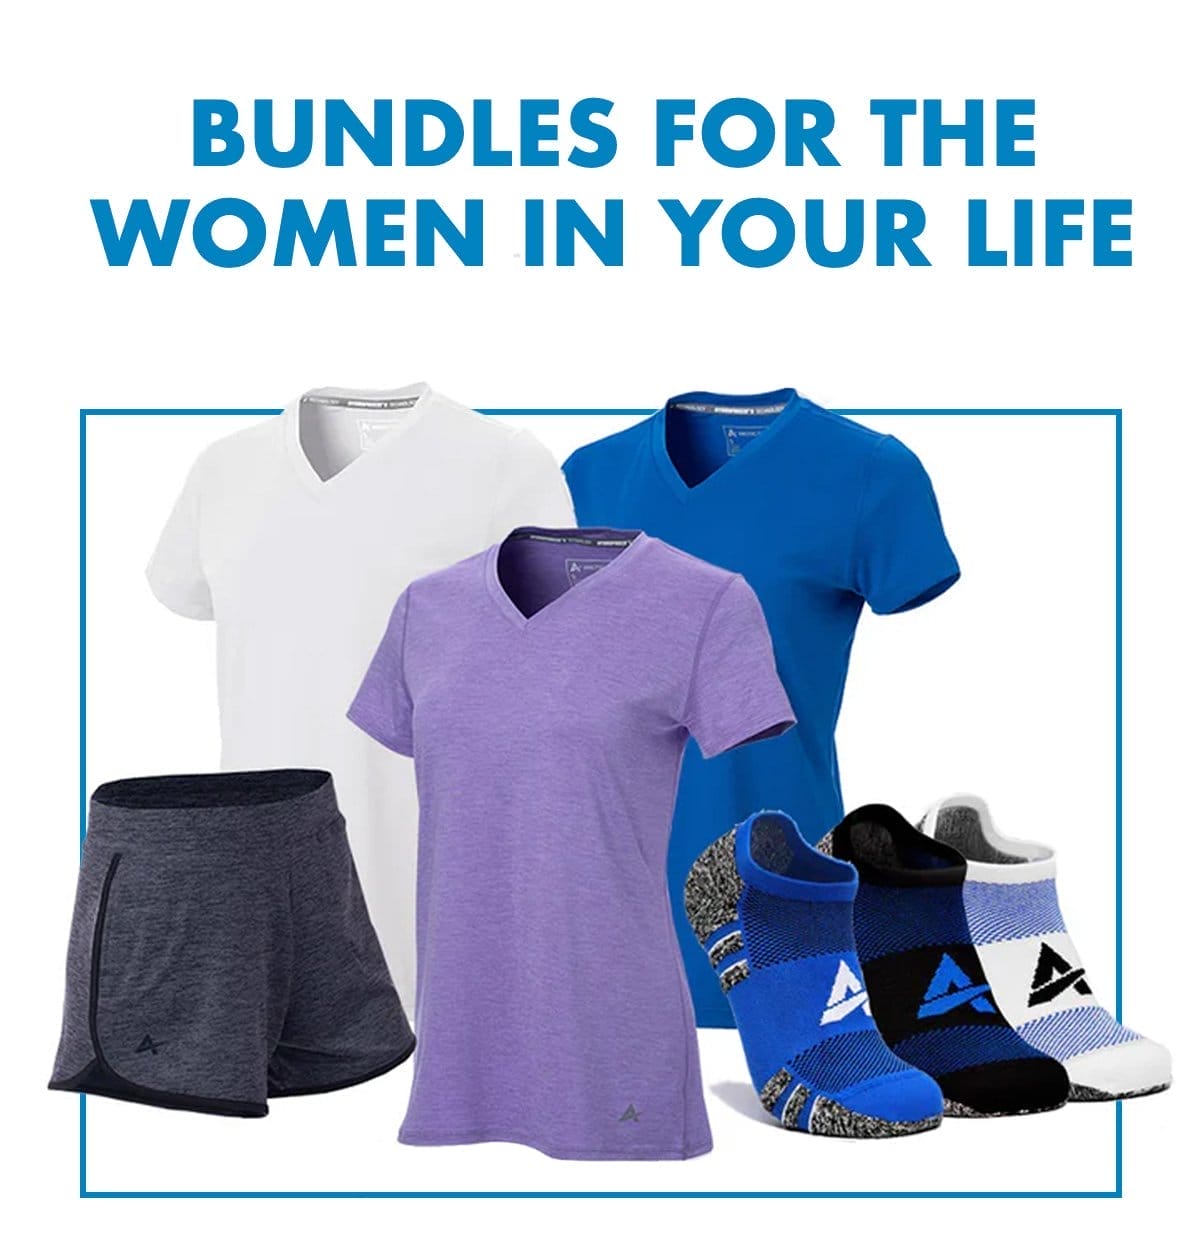 Bundles for the women in your life